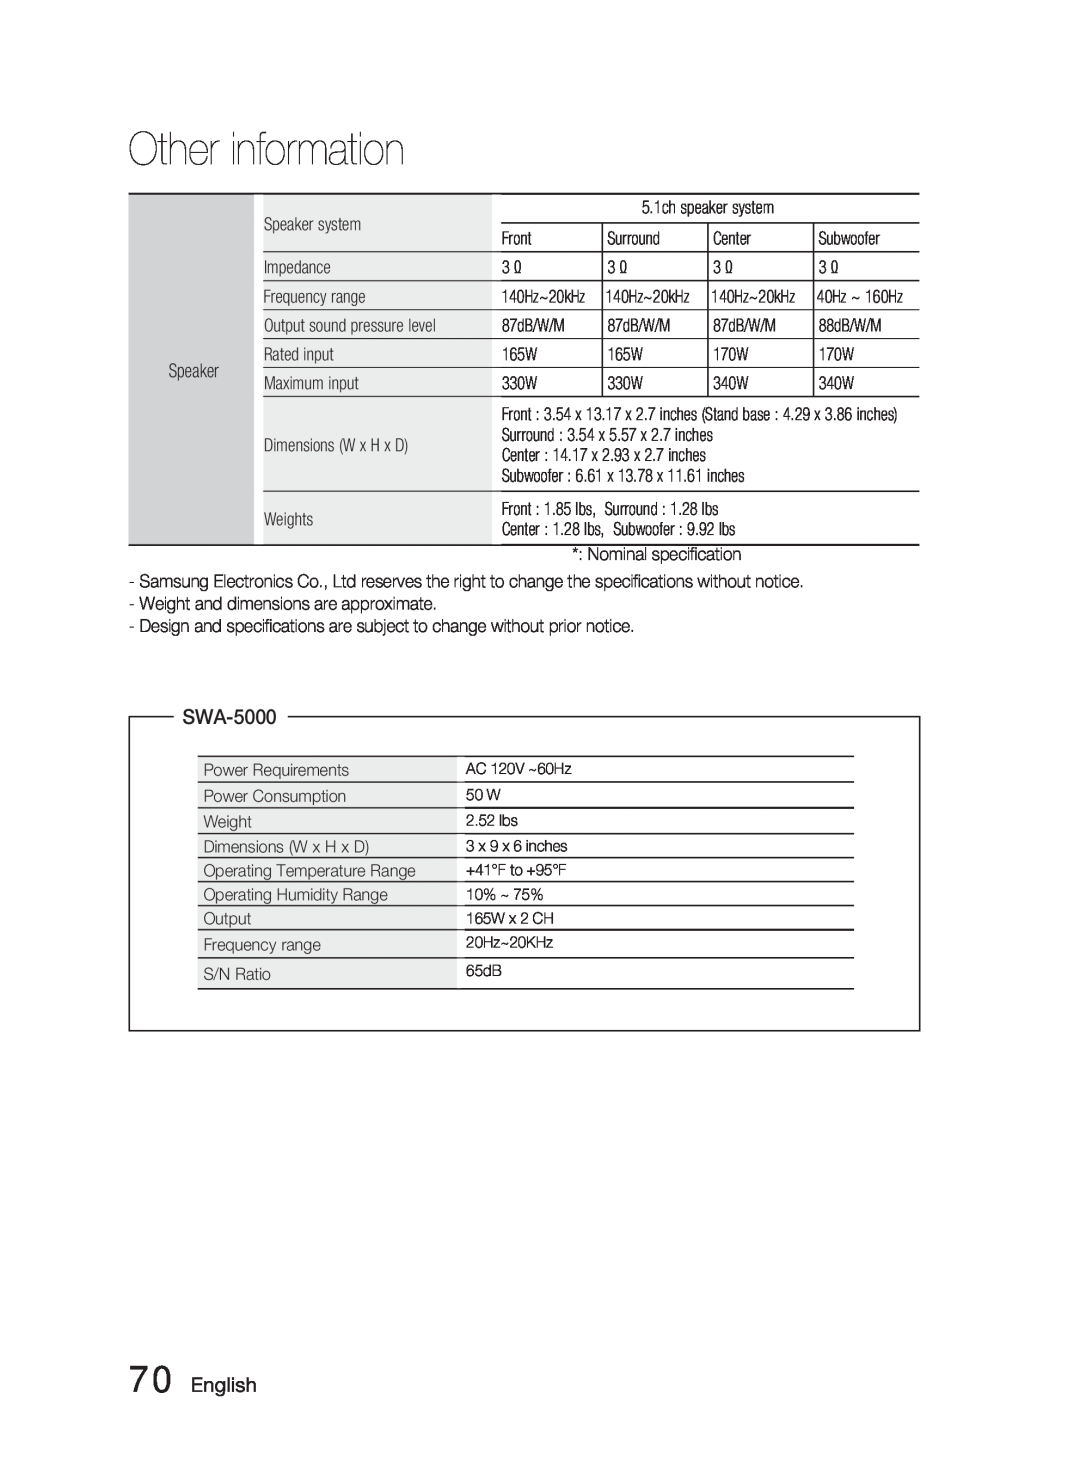 Samsung HT-C6900W user manual SWA-5000, English, Other information 